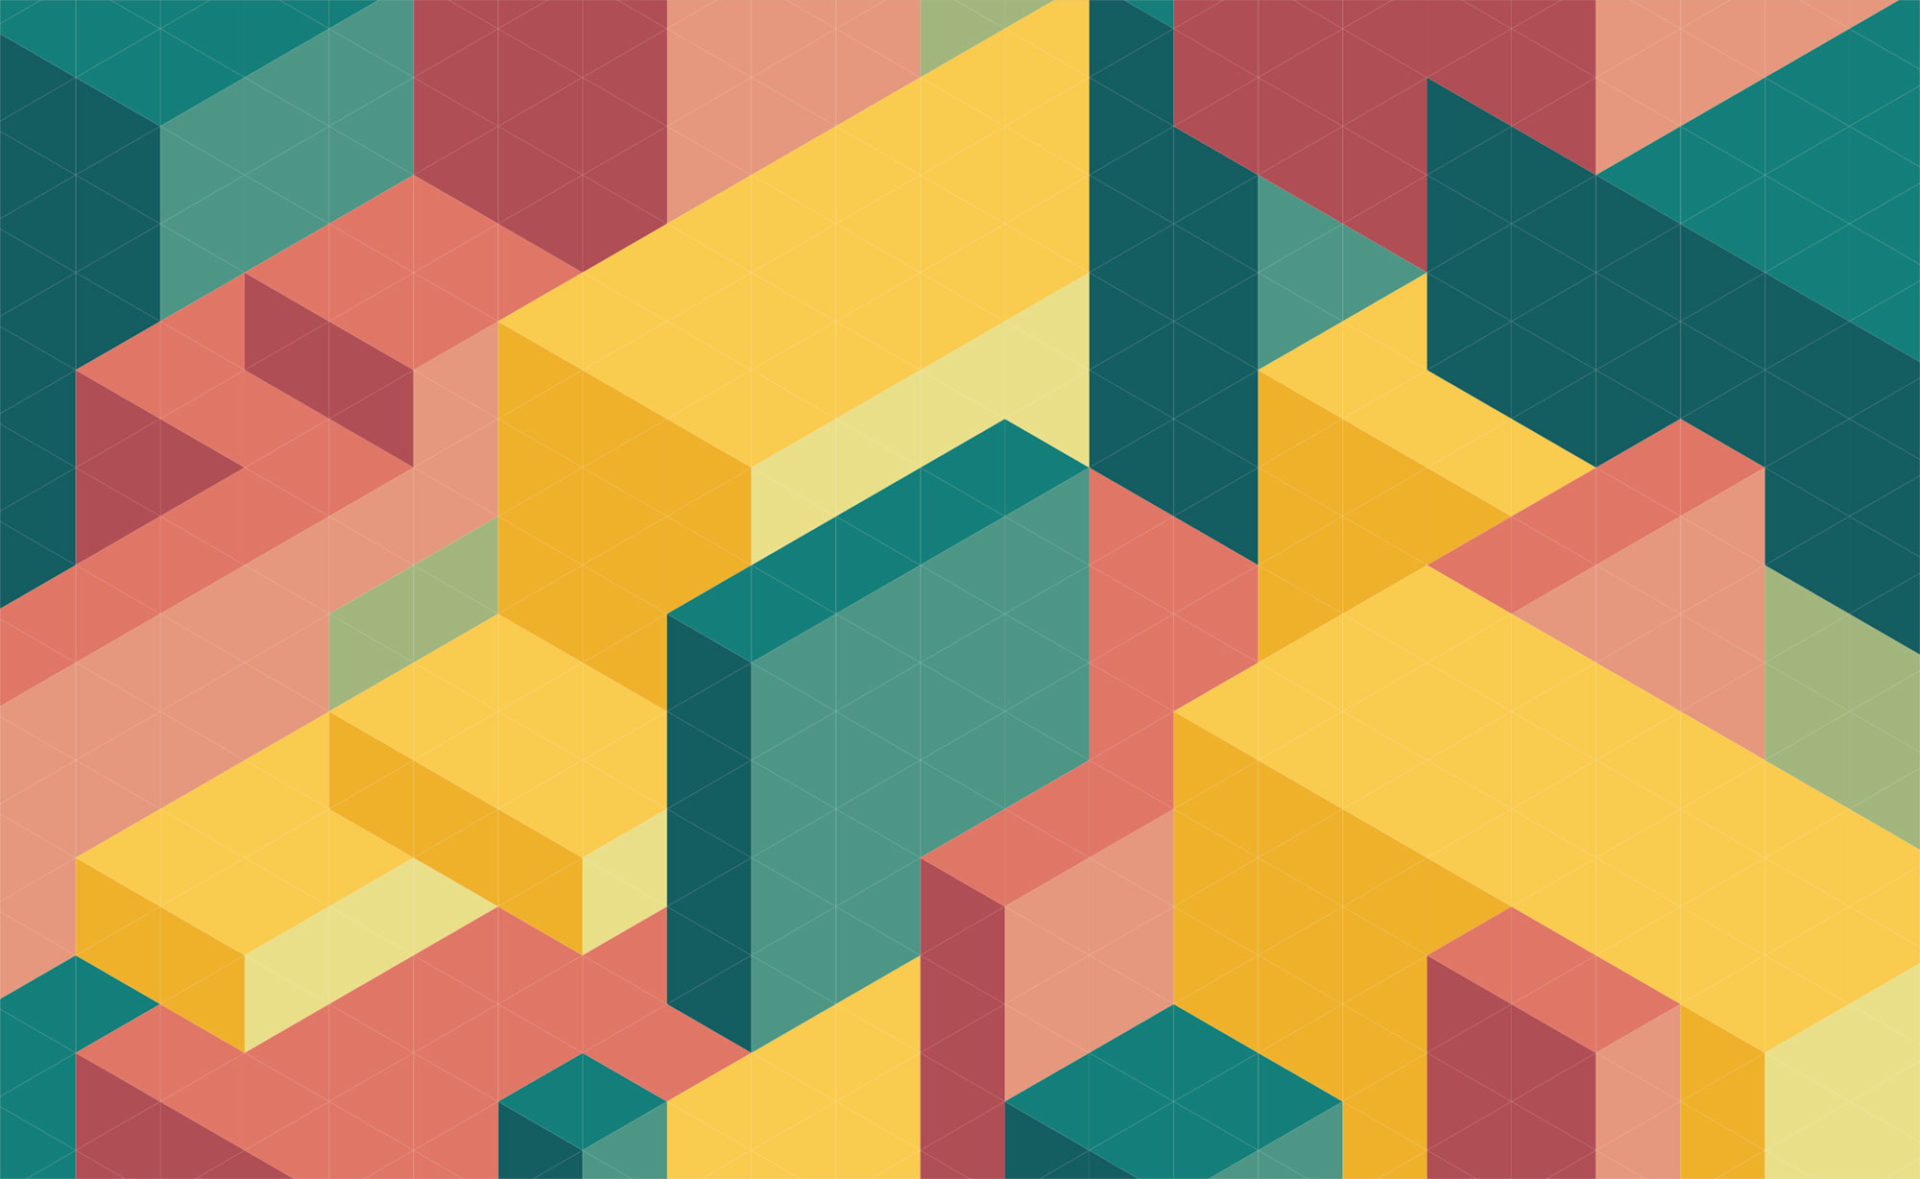 Just Solutions article by Aiko Schaefer featured image of geometric yellow, pink, and teal shapes